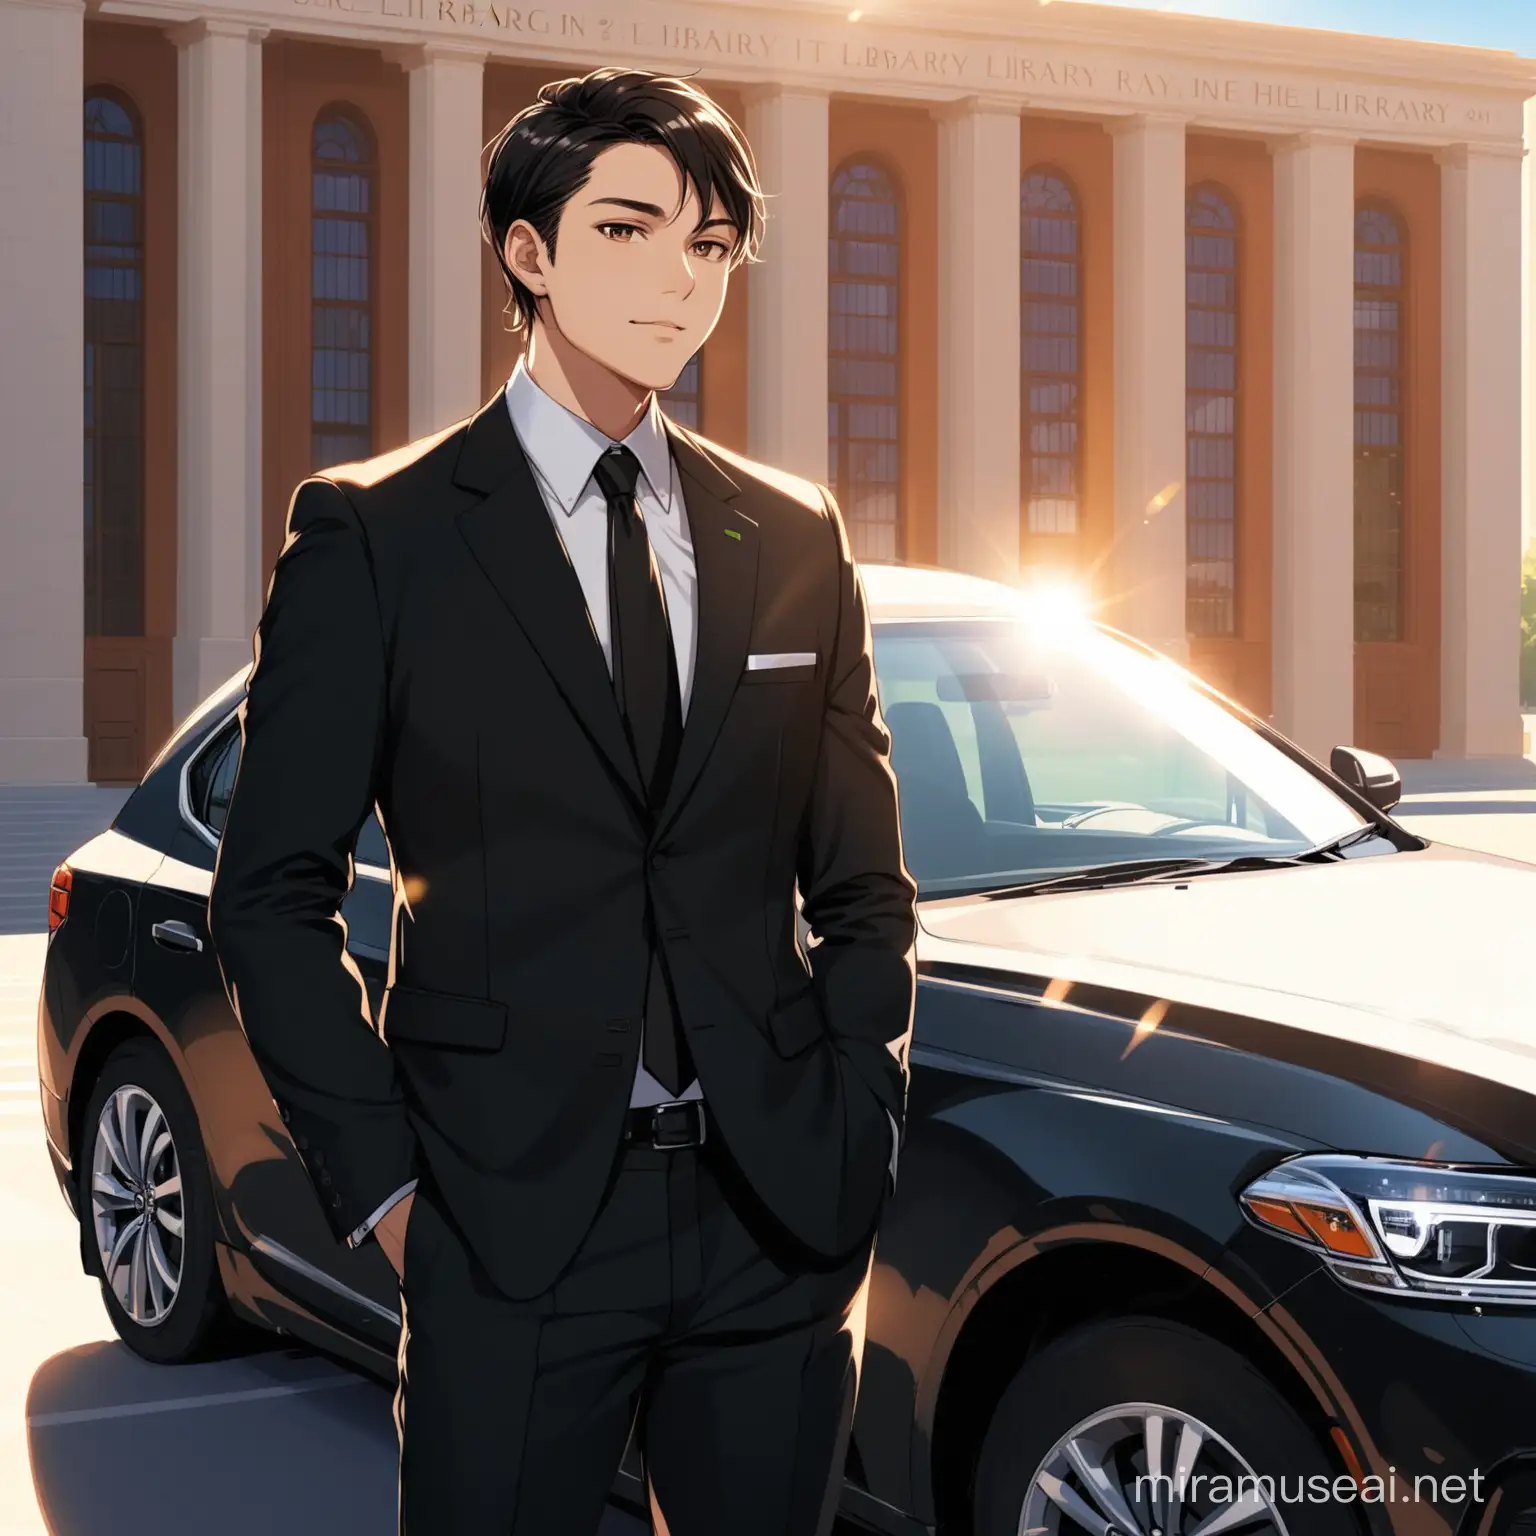 Professional VTC Driver in Formal Attire Posing with Luxury Car at Sunny Library Entrance